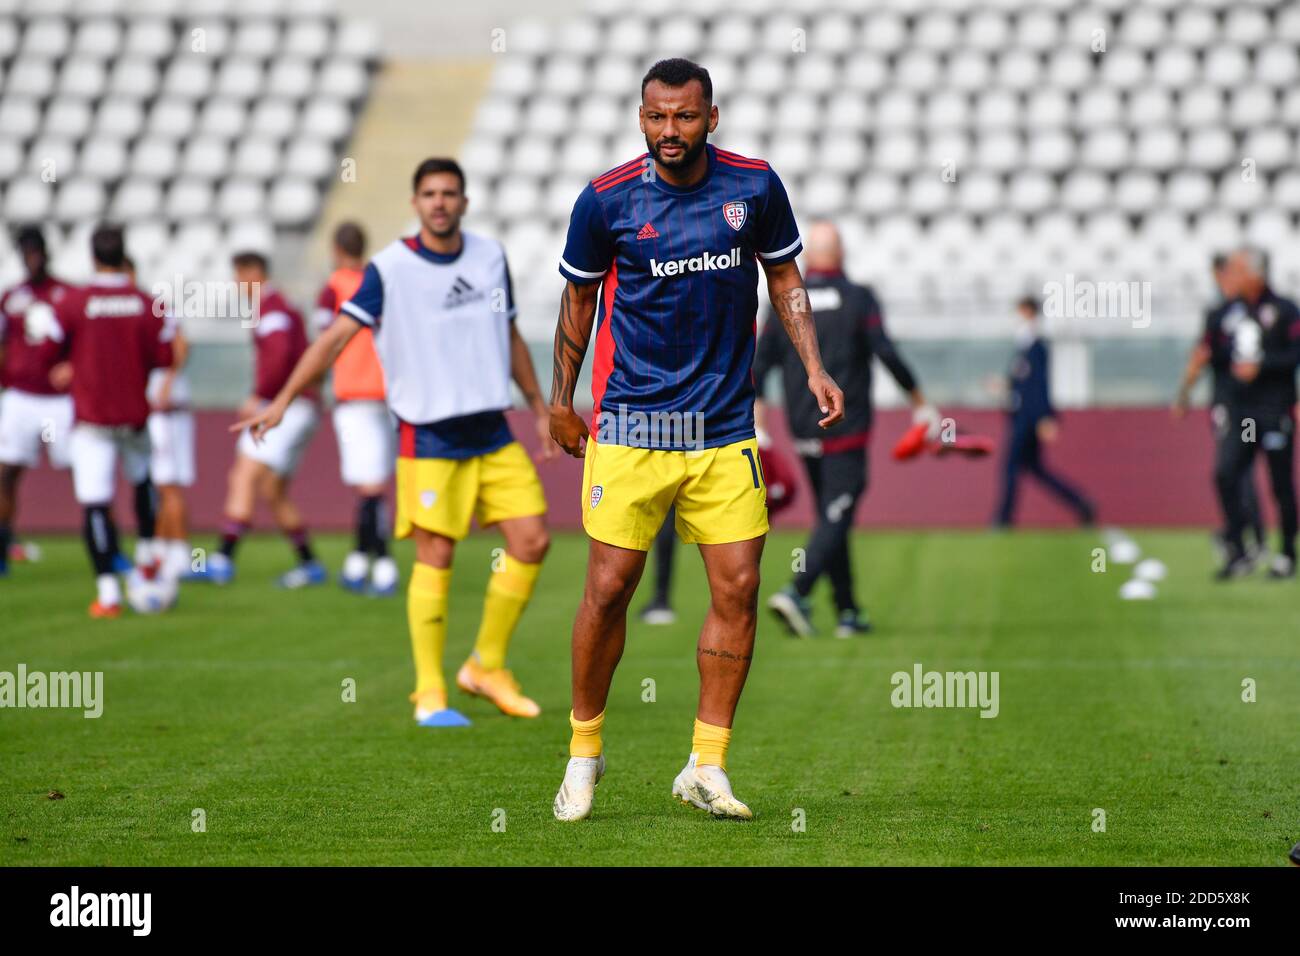 Torino, Italy. 18th, October 2020. Joao Pedro (10) of Cagliari seen during the warm up for the Serie A match between Torino and Cagliari at Stadio Olimpico in Torino. (Photo credit: Gonzales Photo - Tommaso Fimiano). Stock Photo